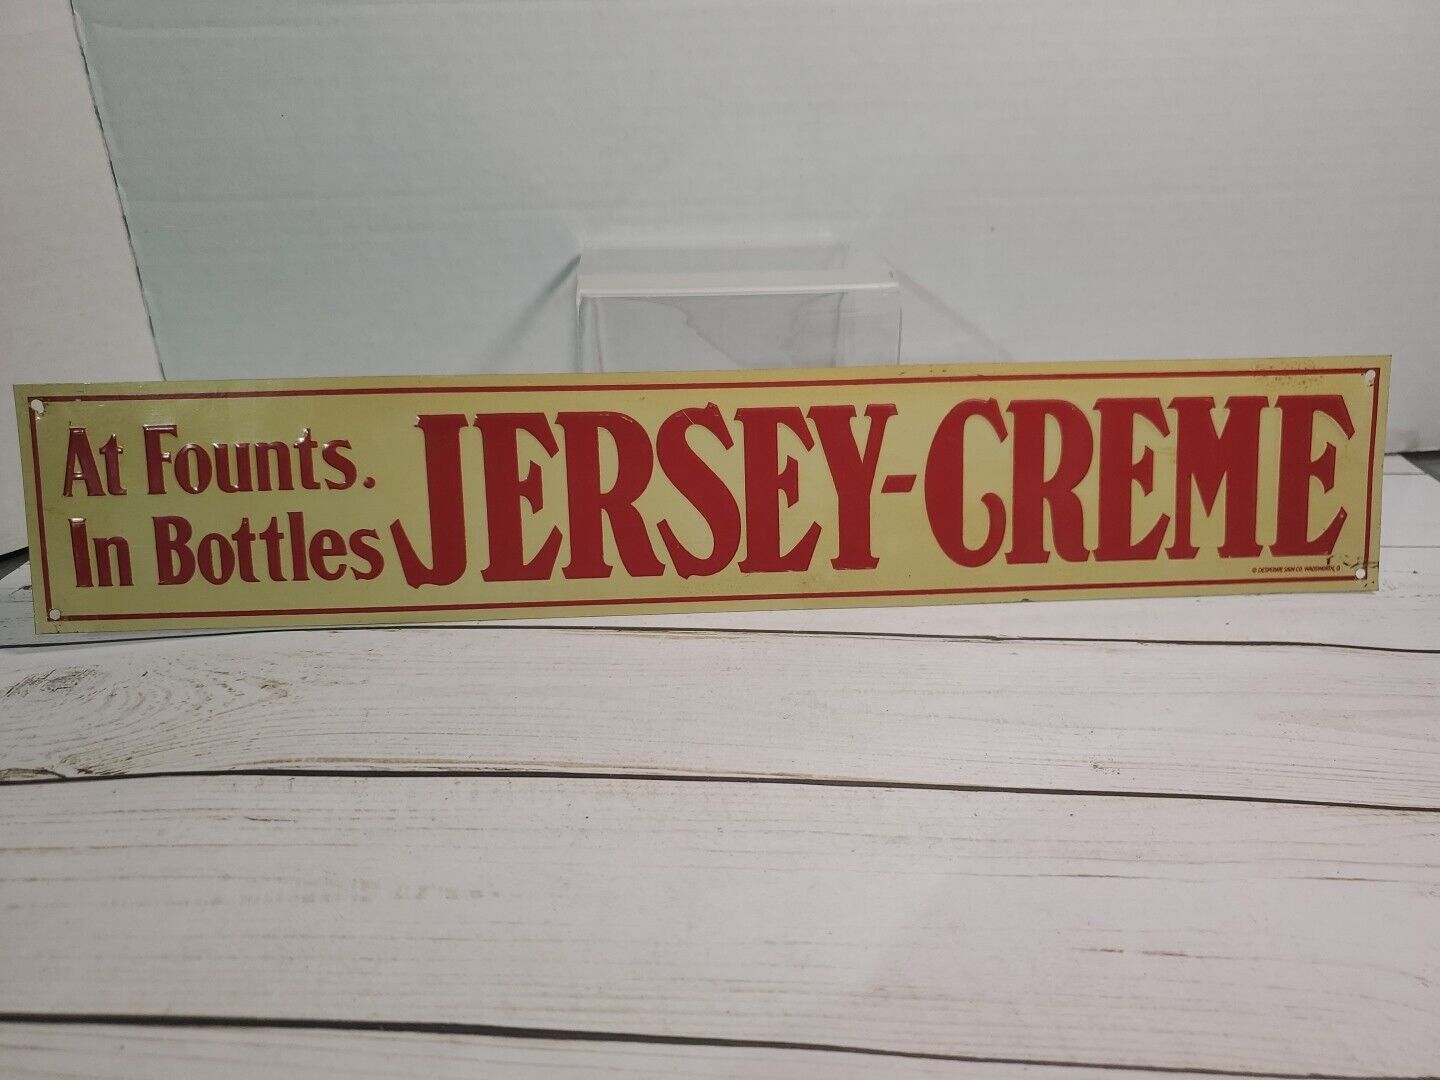 VTG JERSEY-CREME At Founts. In Bottles Embossed Soda Tin Metal Sign 17x3 Clean 